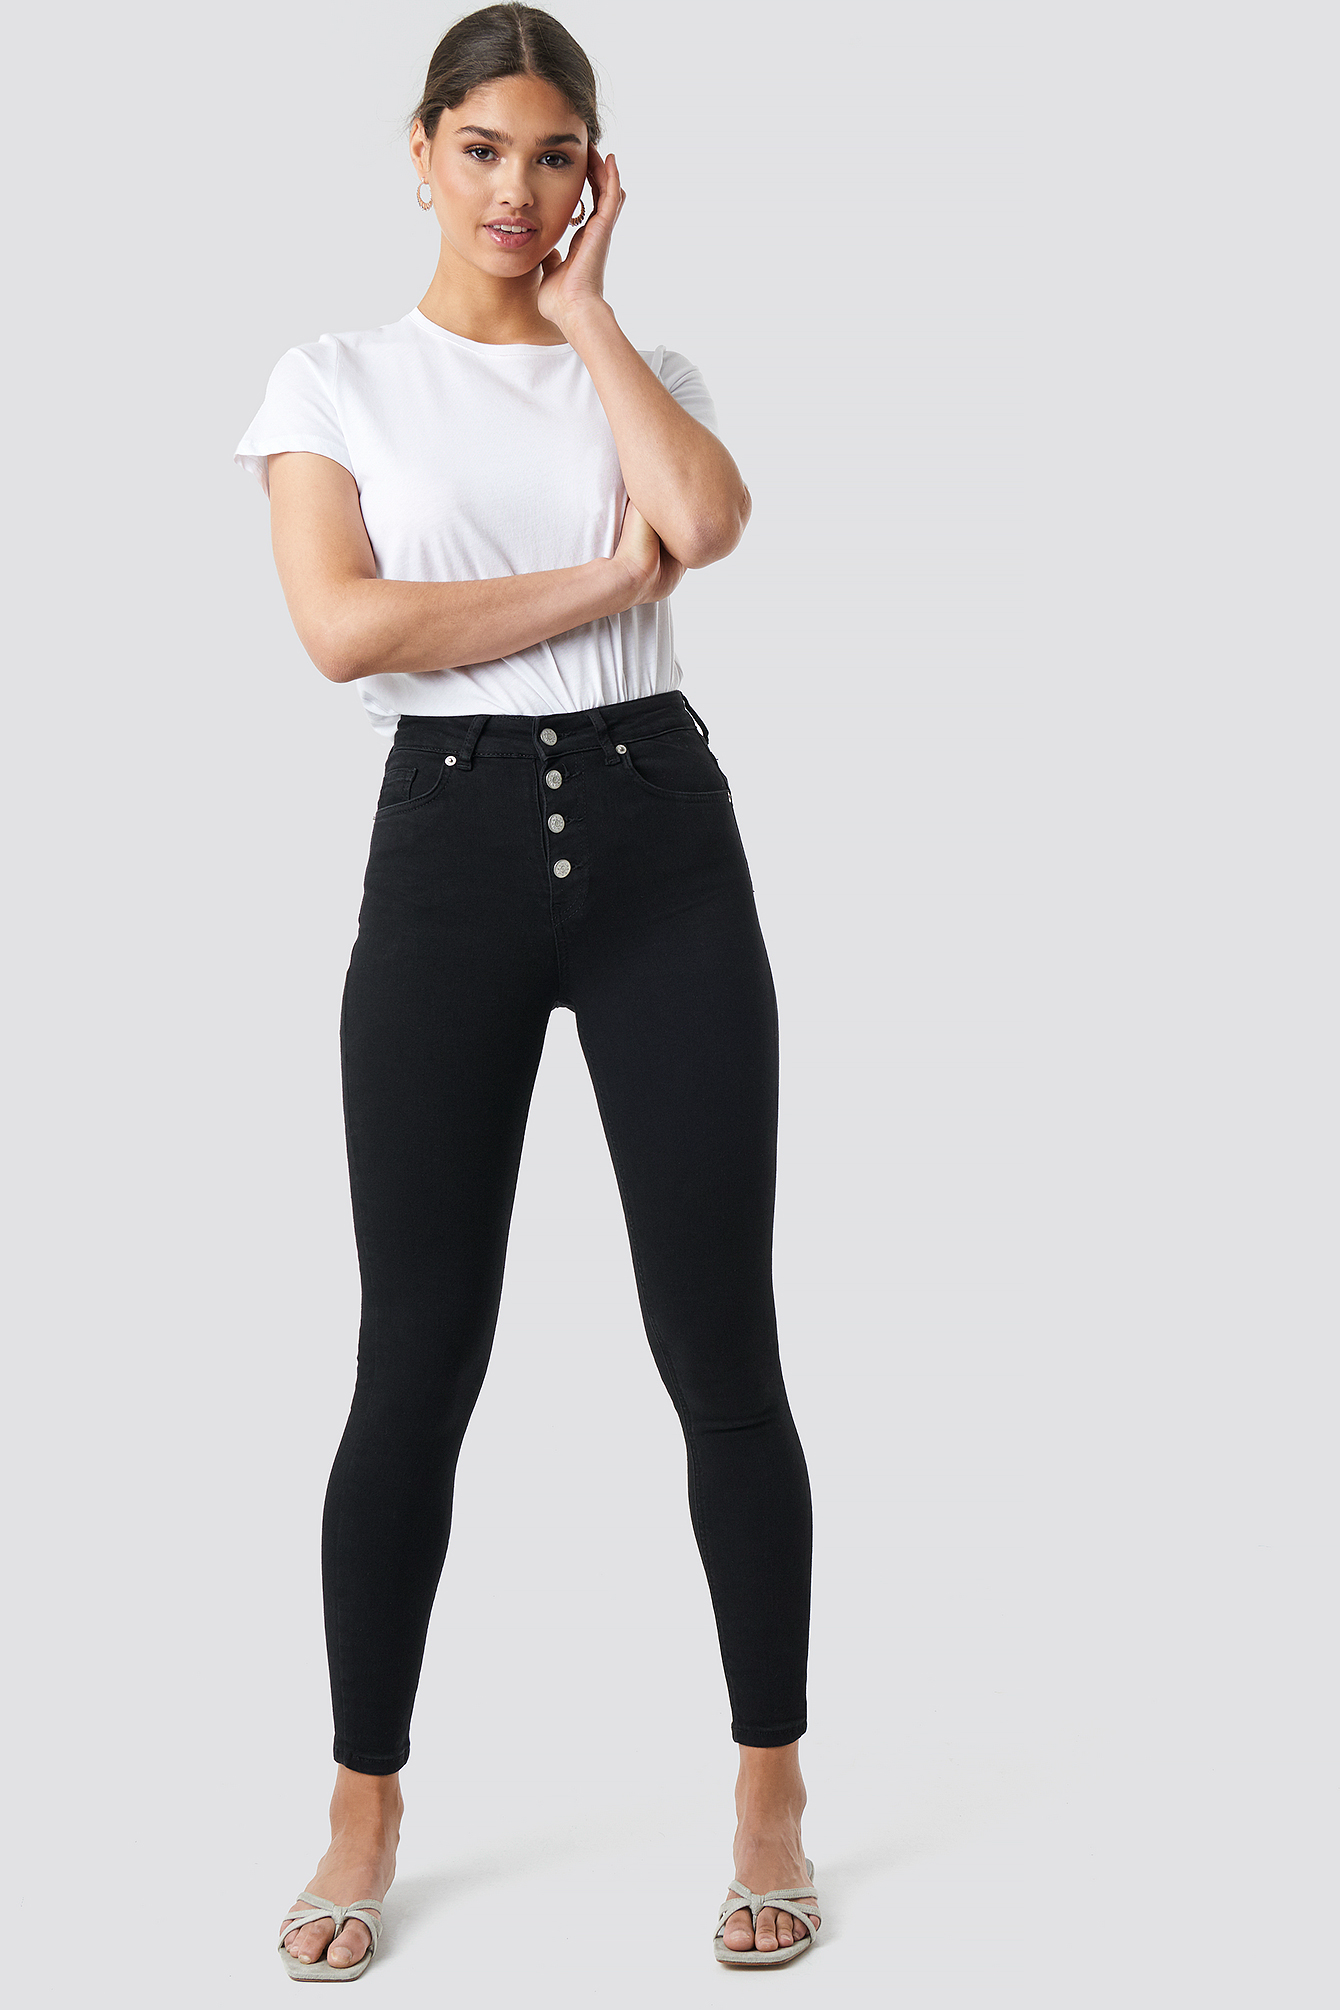 high waisted button black jeans